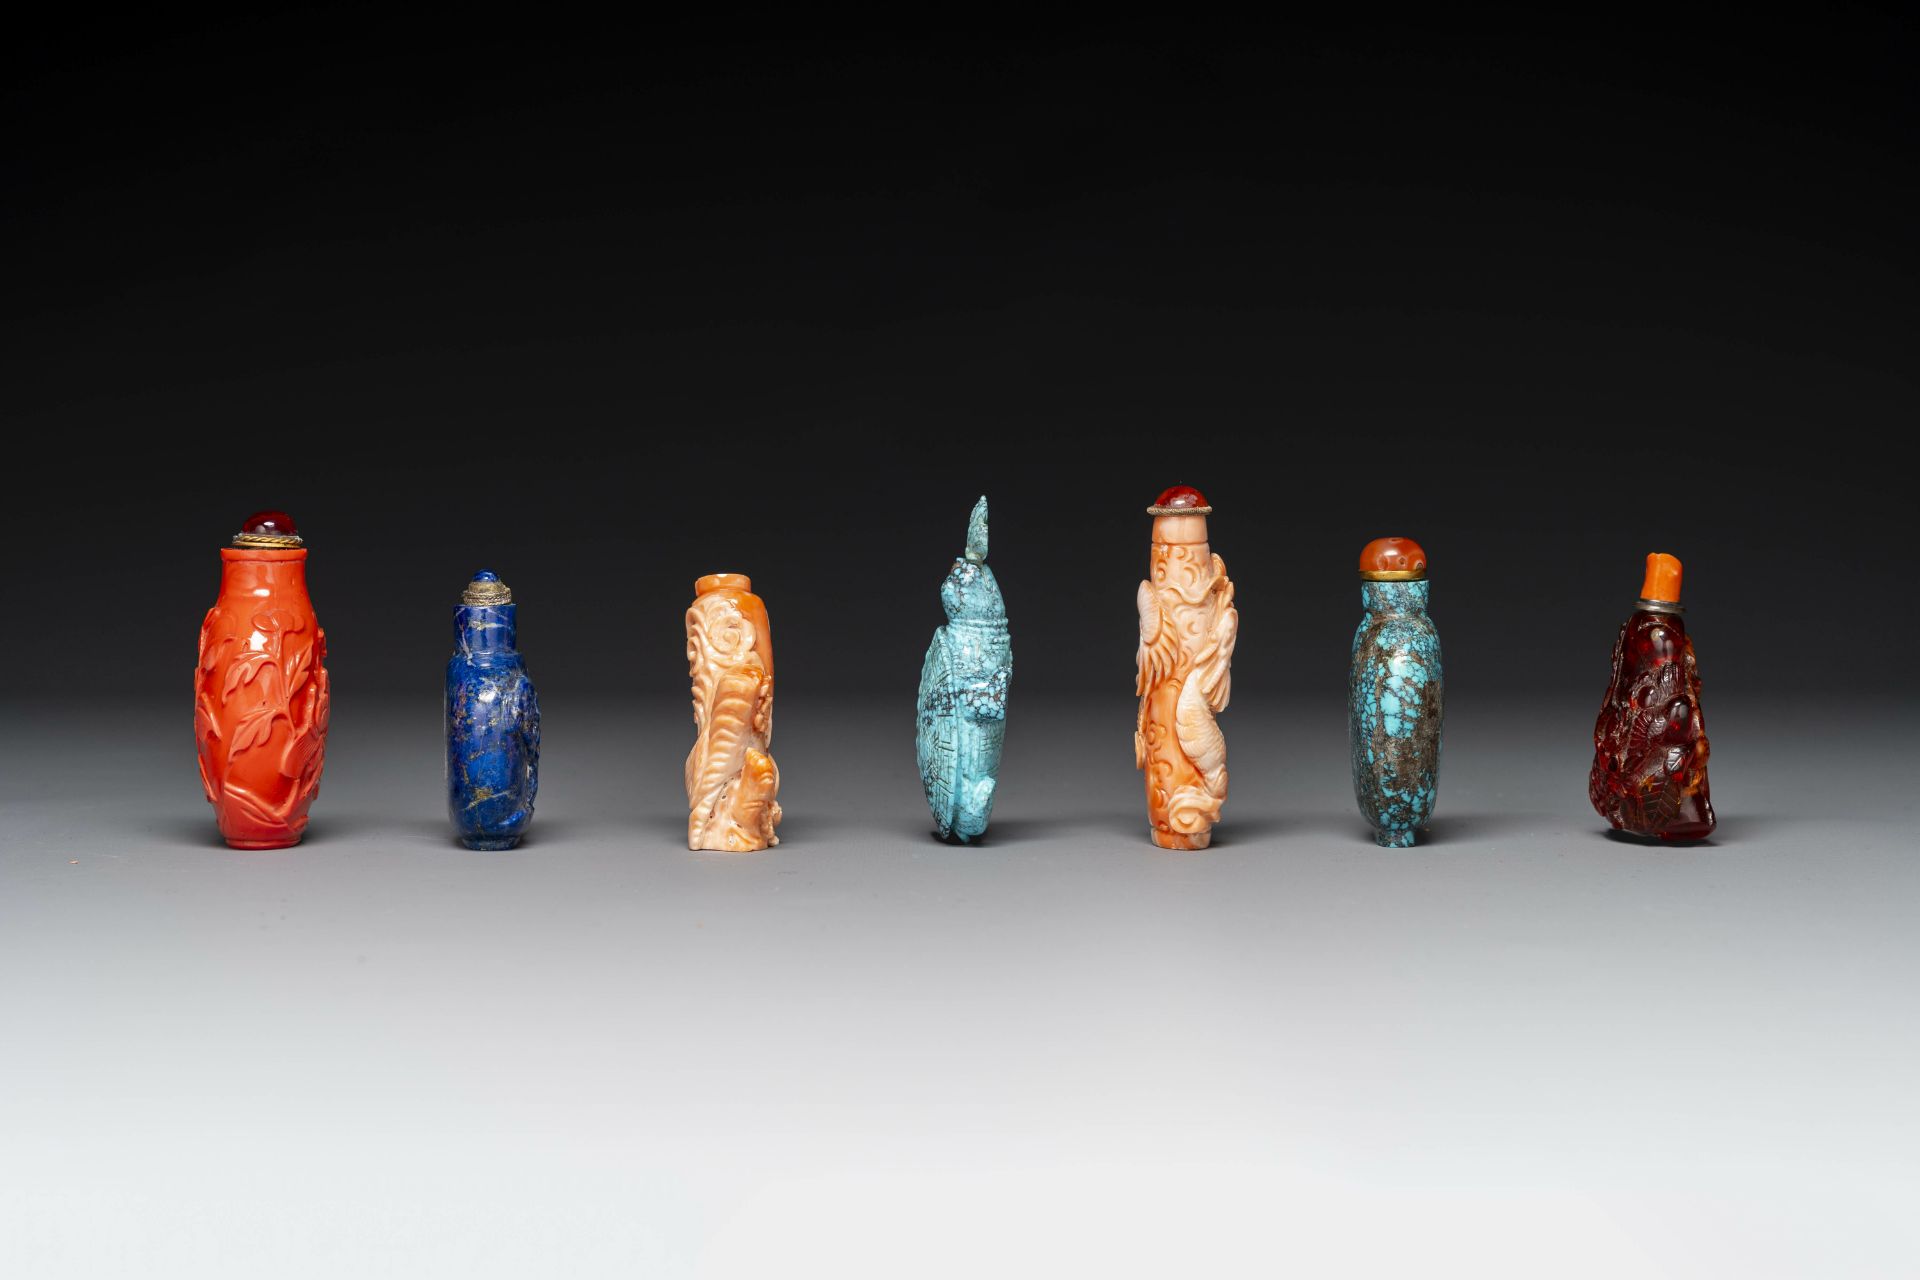 Seven varied Chinese snuff bottles of precious stone, red coral, glass and amber, 19th C. - Image 2 of 7